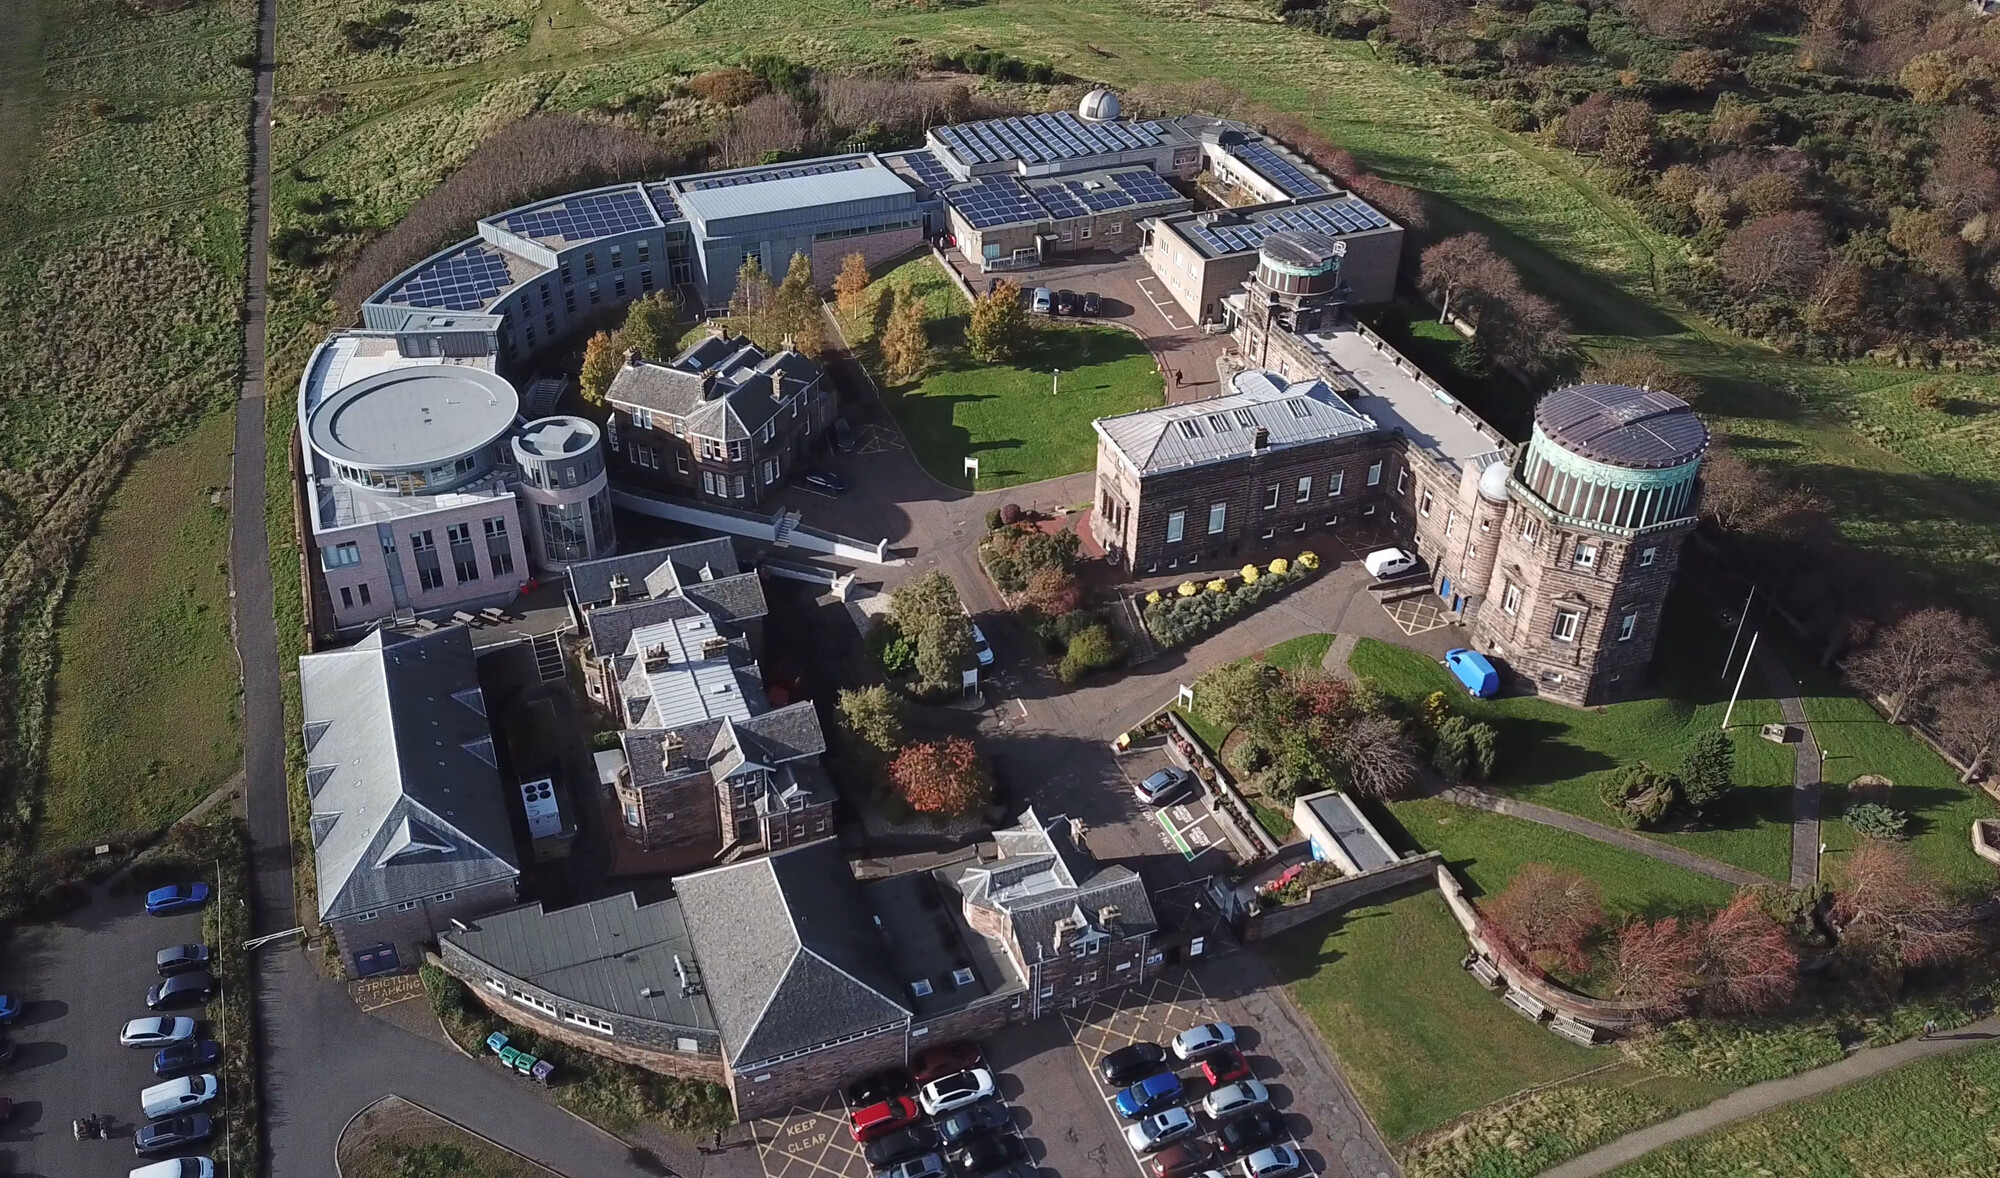 An aerial photo of the UK ATC buildings showing the Victorian observatory, labs, workshops and offices.